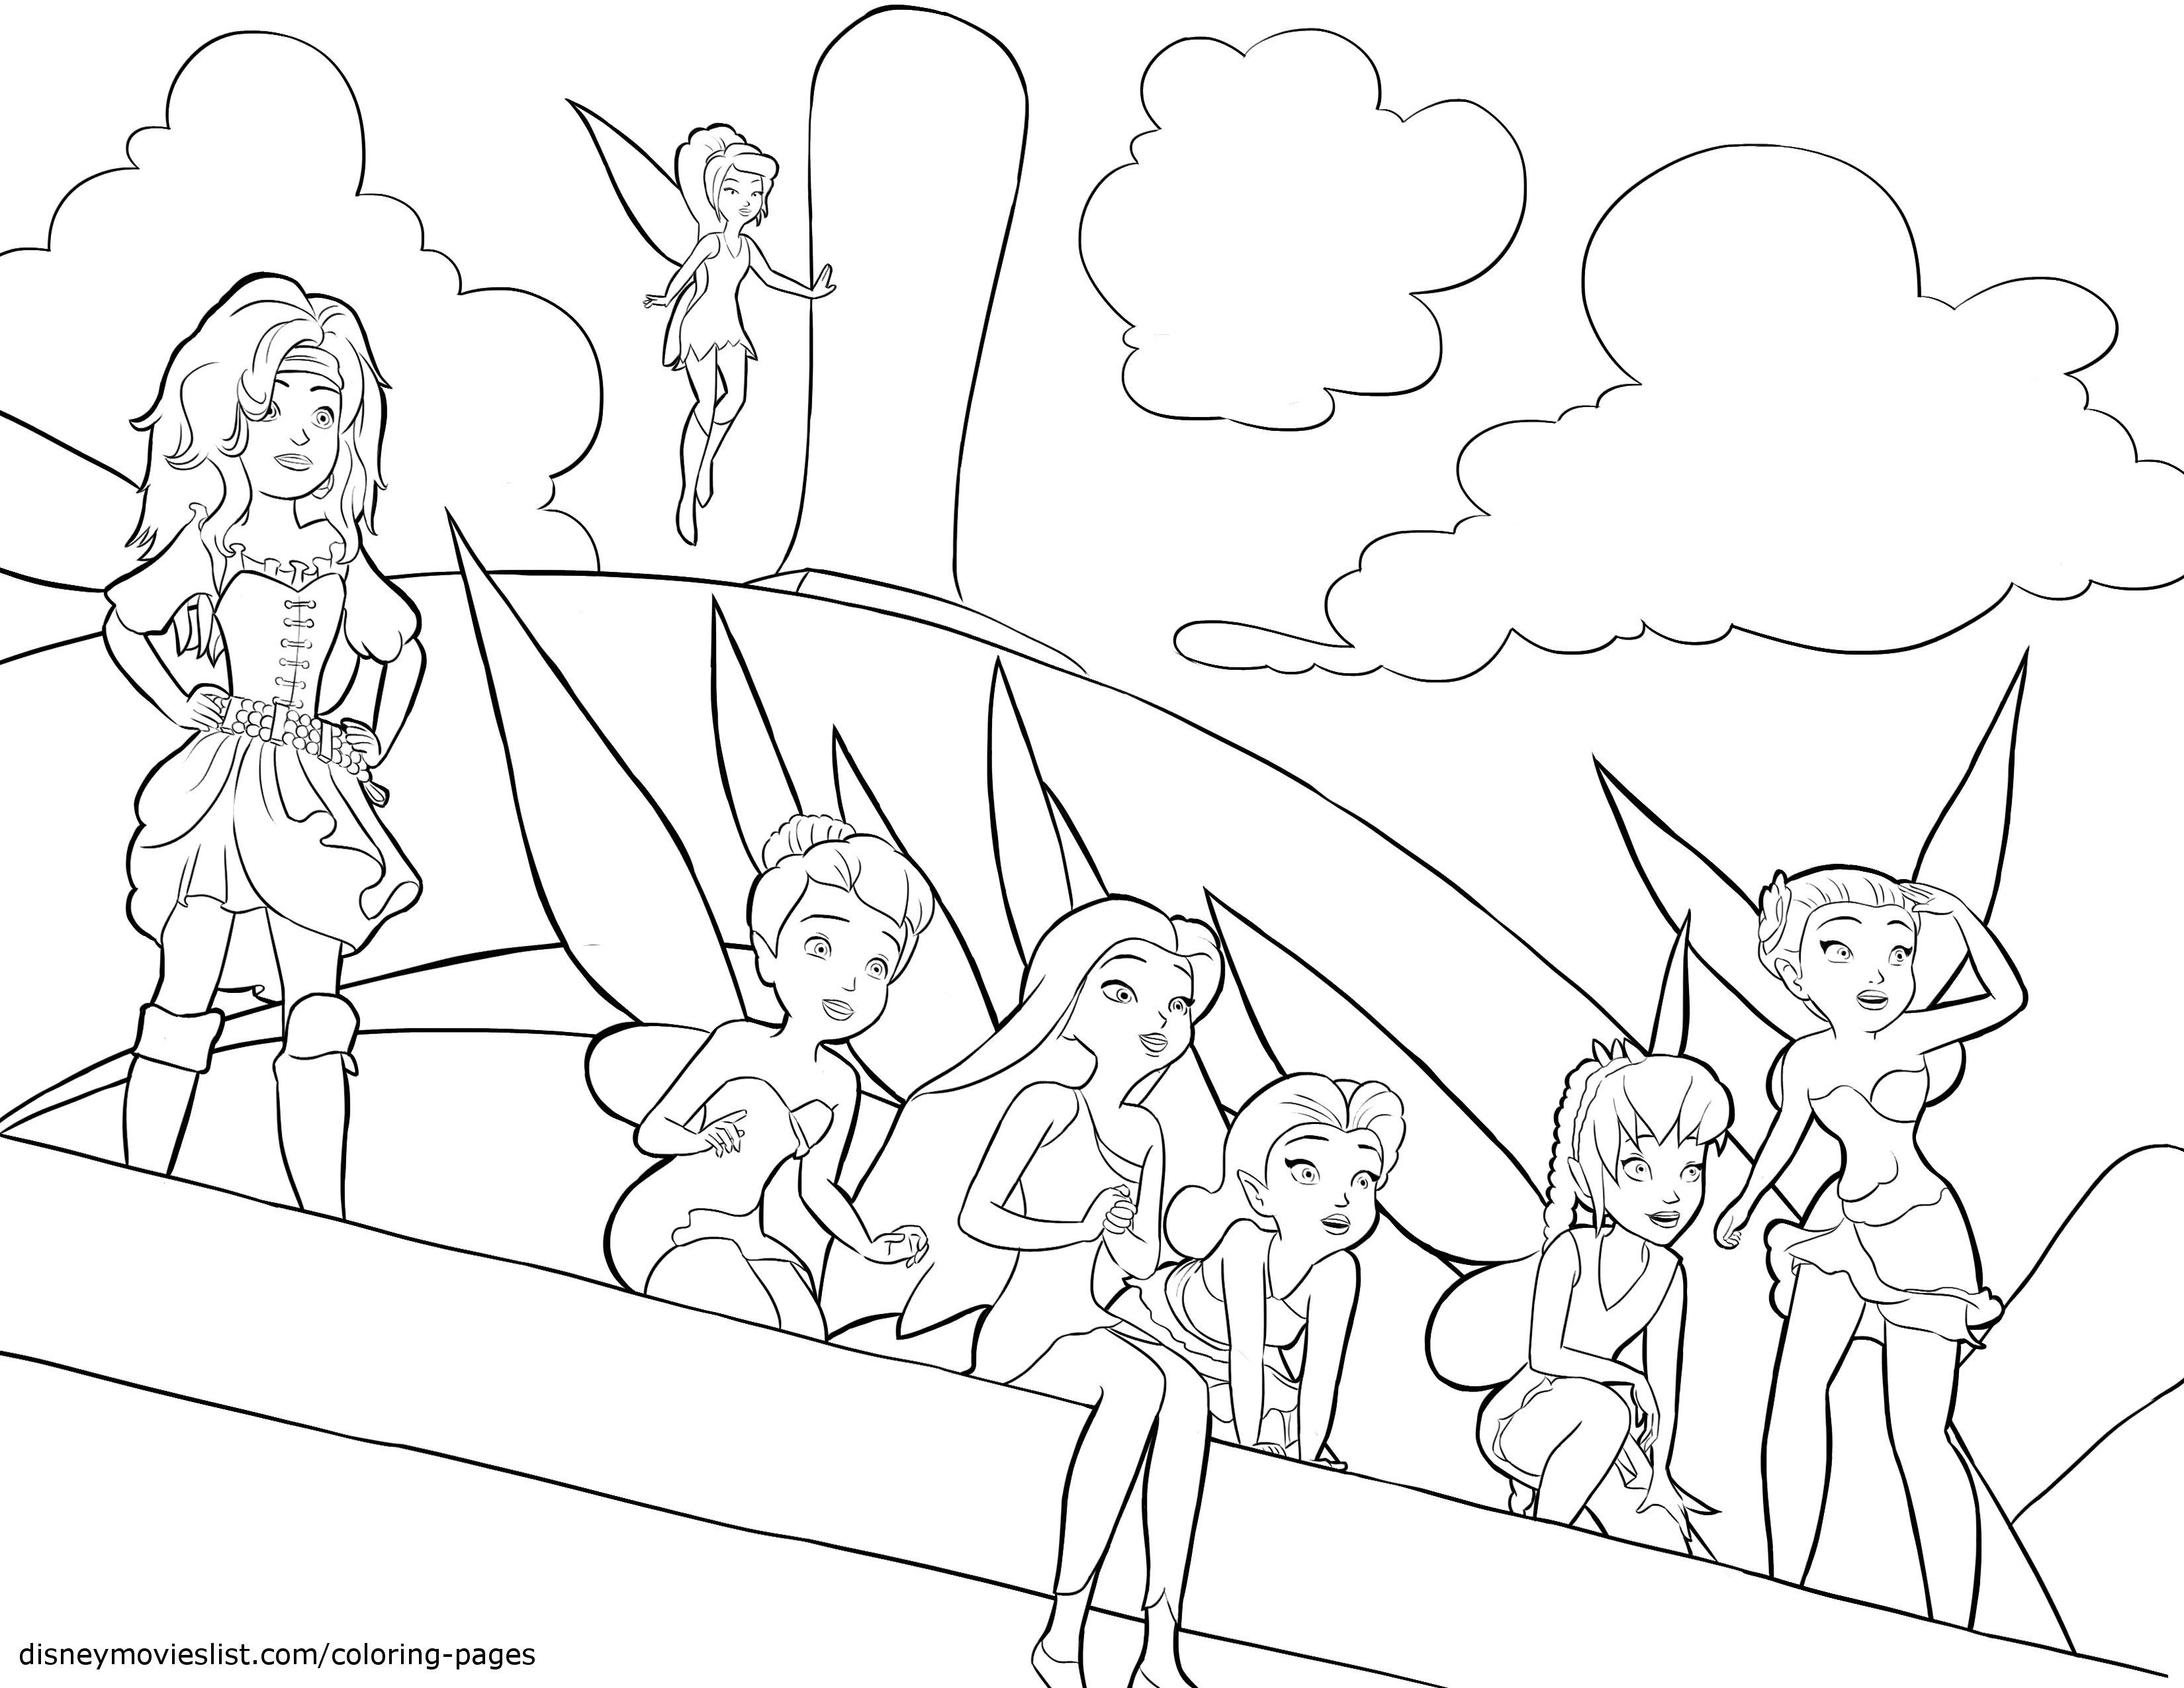 All Coloring Pages Tinkerbell Disney - Coloring Pages For All Ages